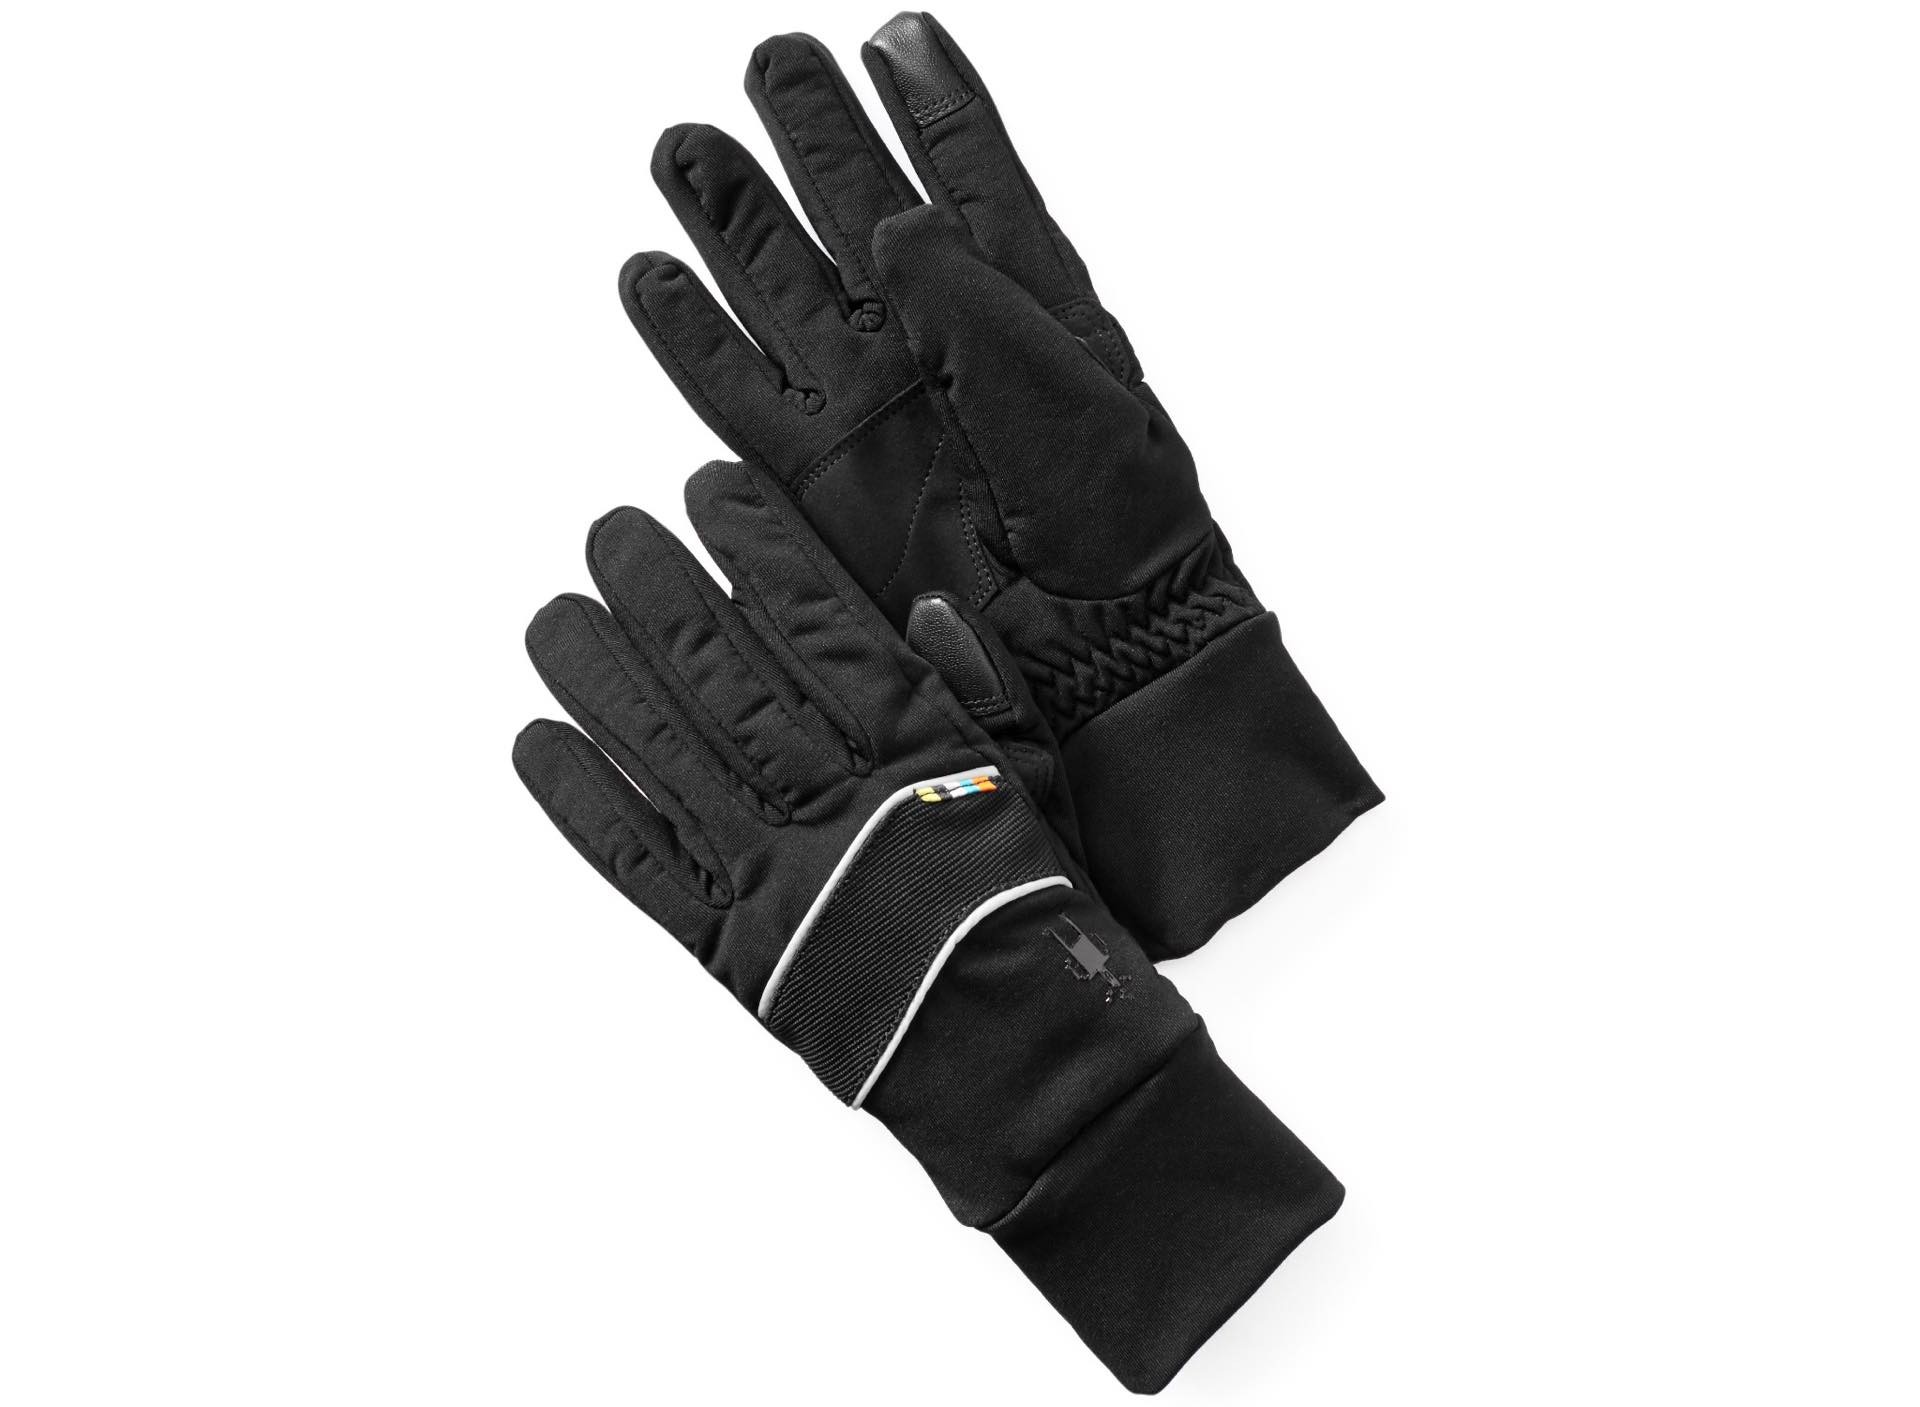 Smartwool "PhD" insulated training gloves. ($60)